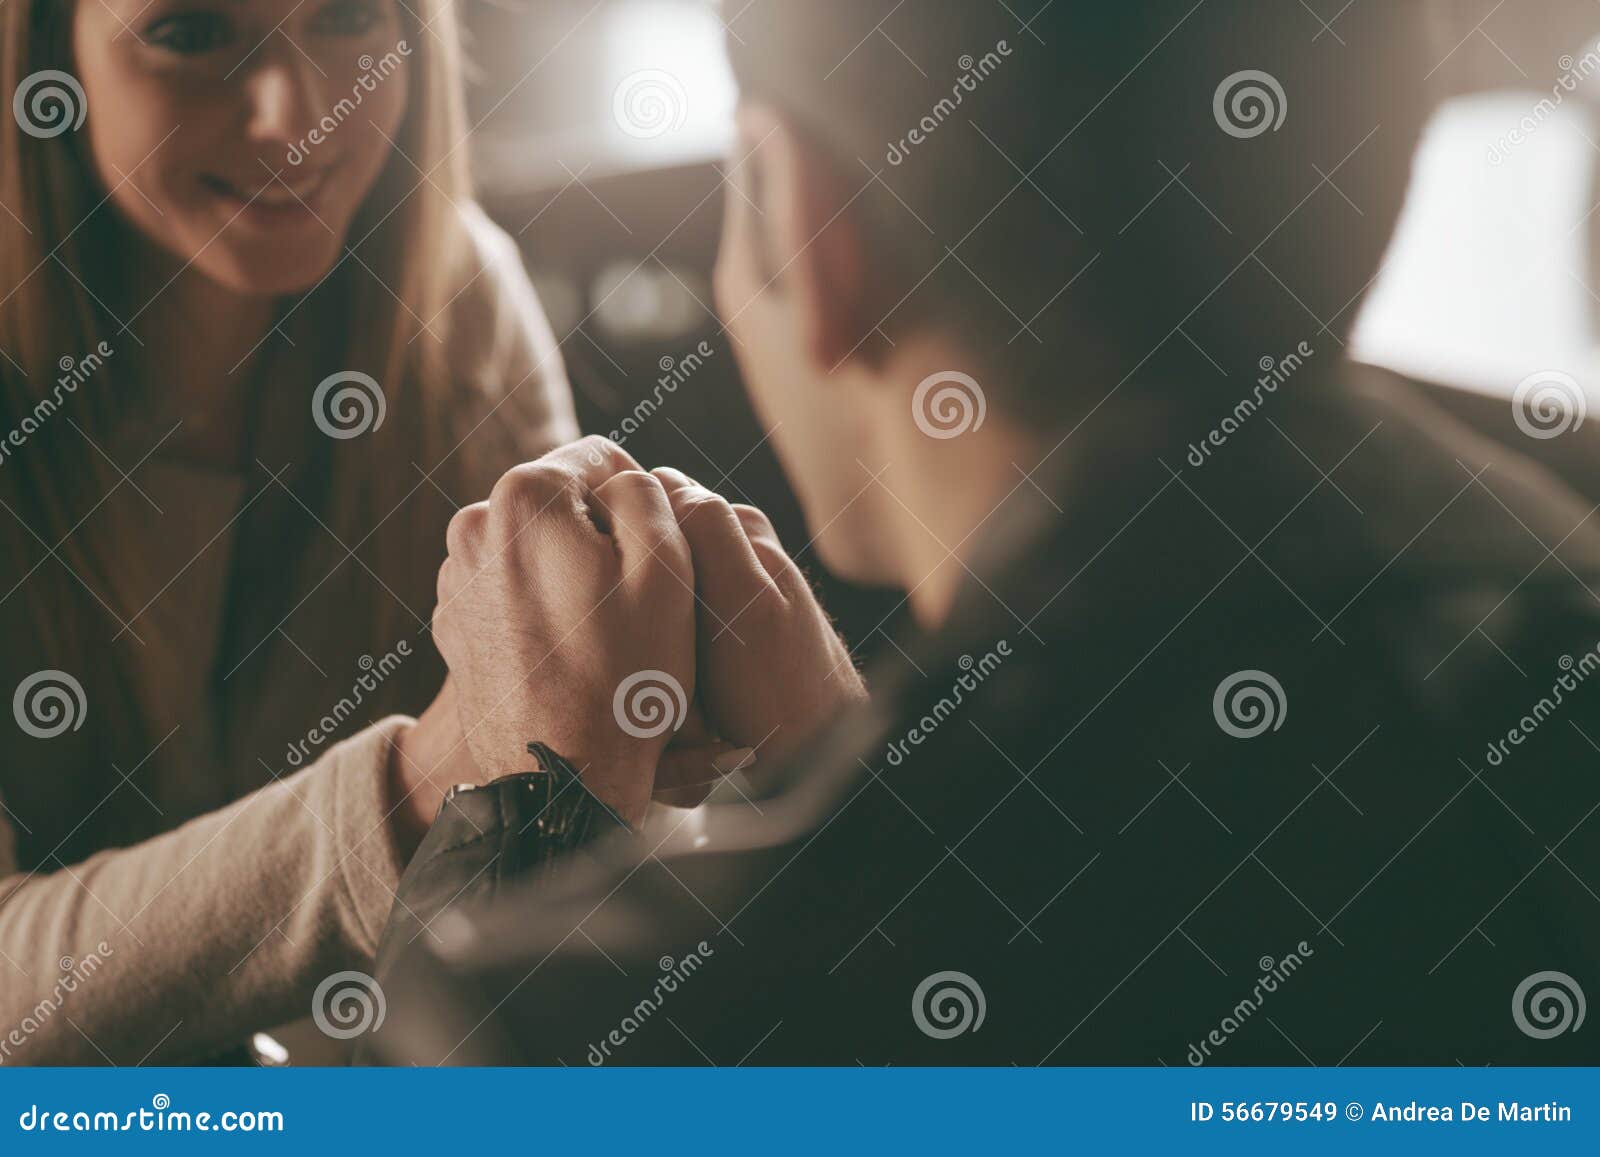 Romantic Couple Holding Hands At The Bar Stock Image Image Of